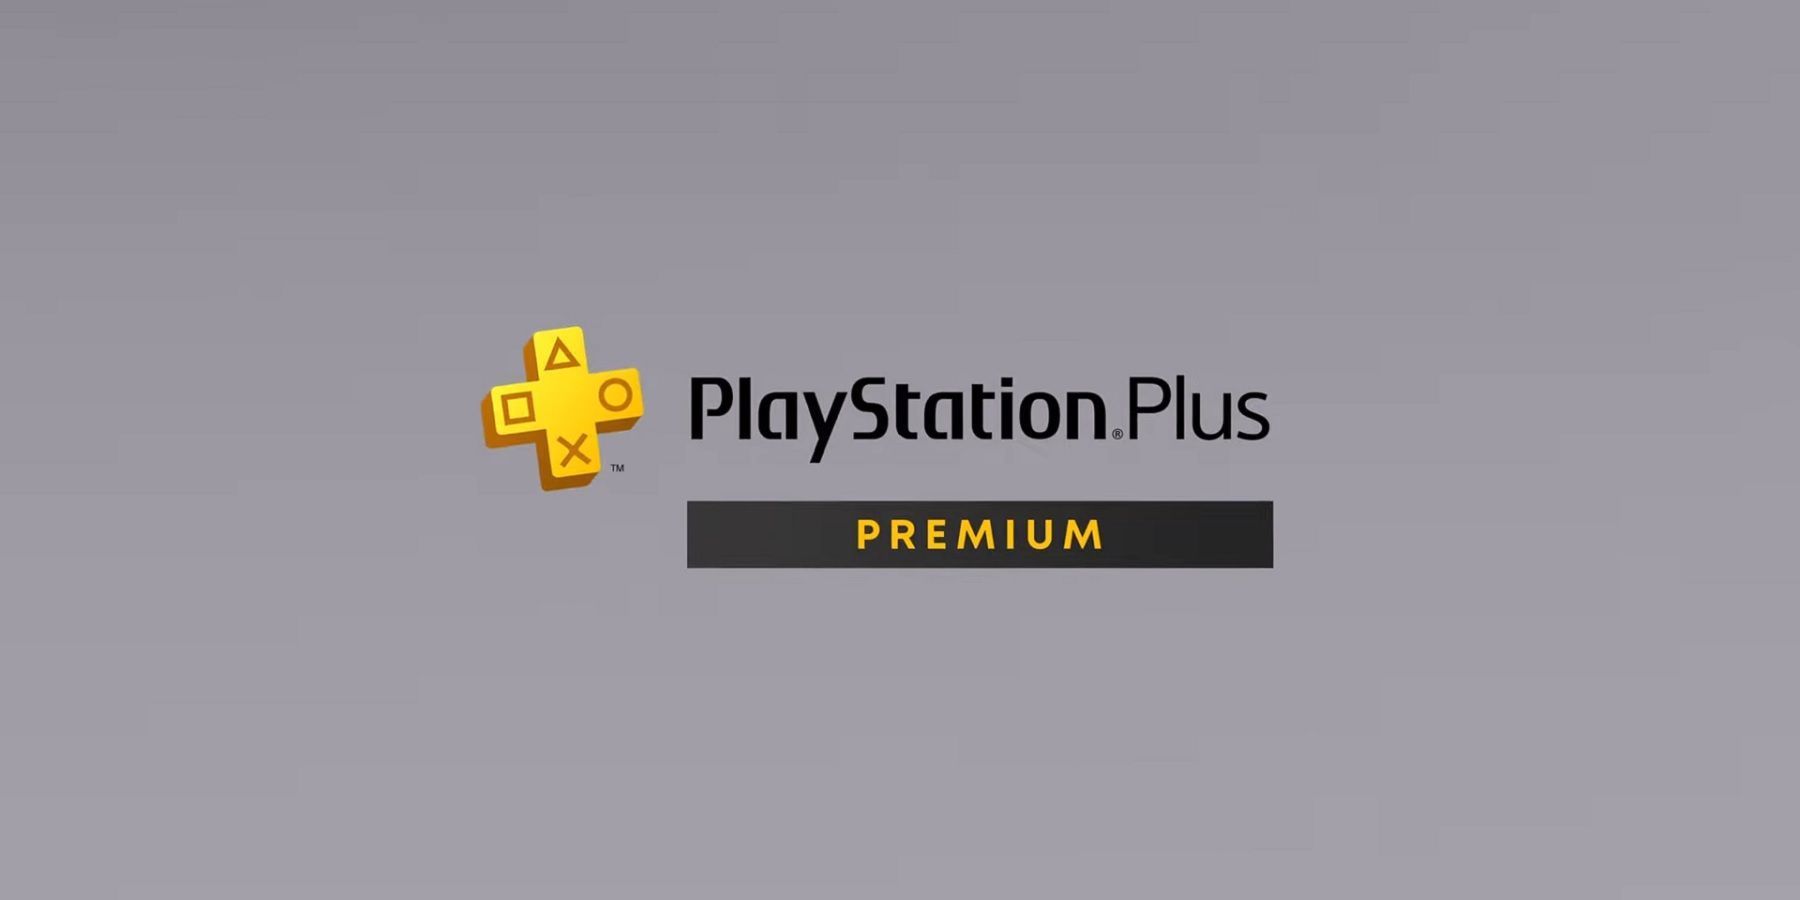 PlayStation Plus Premium Includes Streaming On PC - The Tech Game